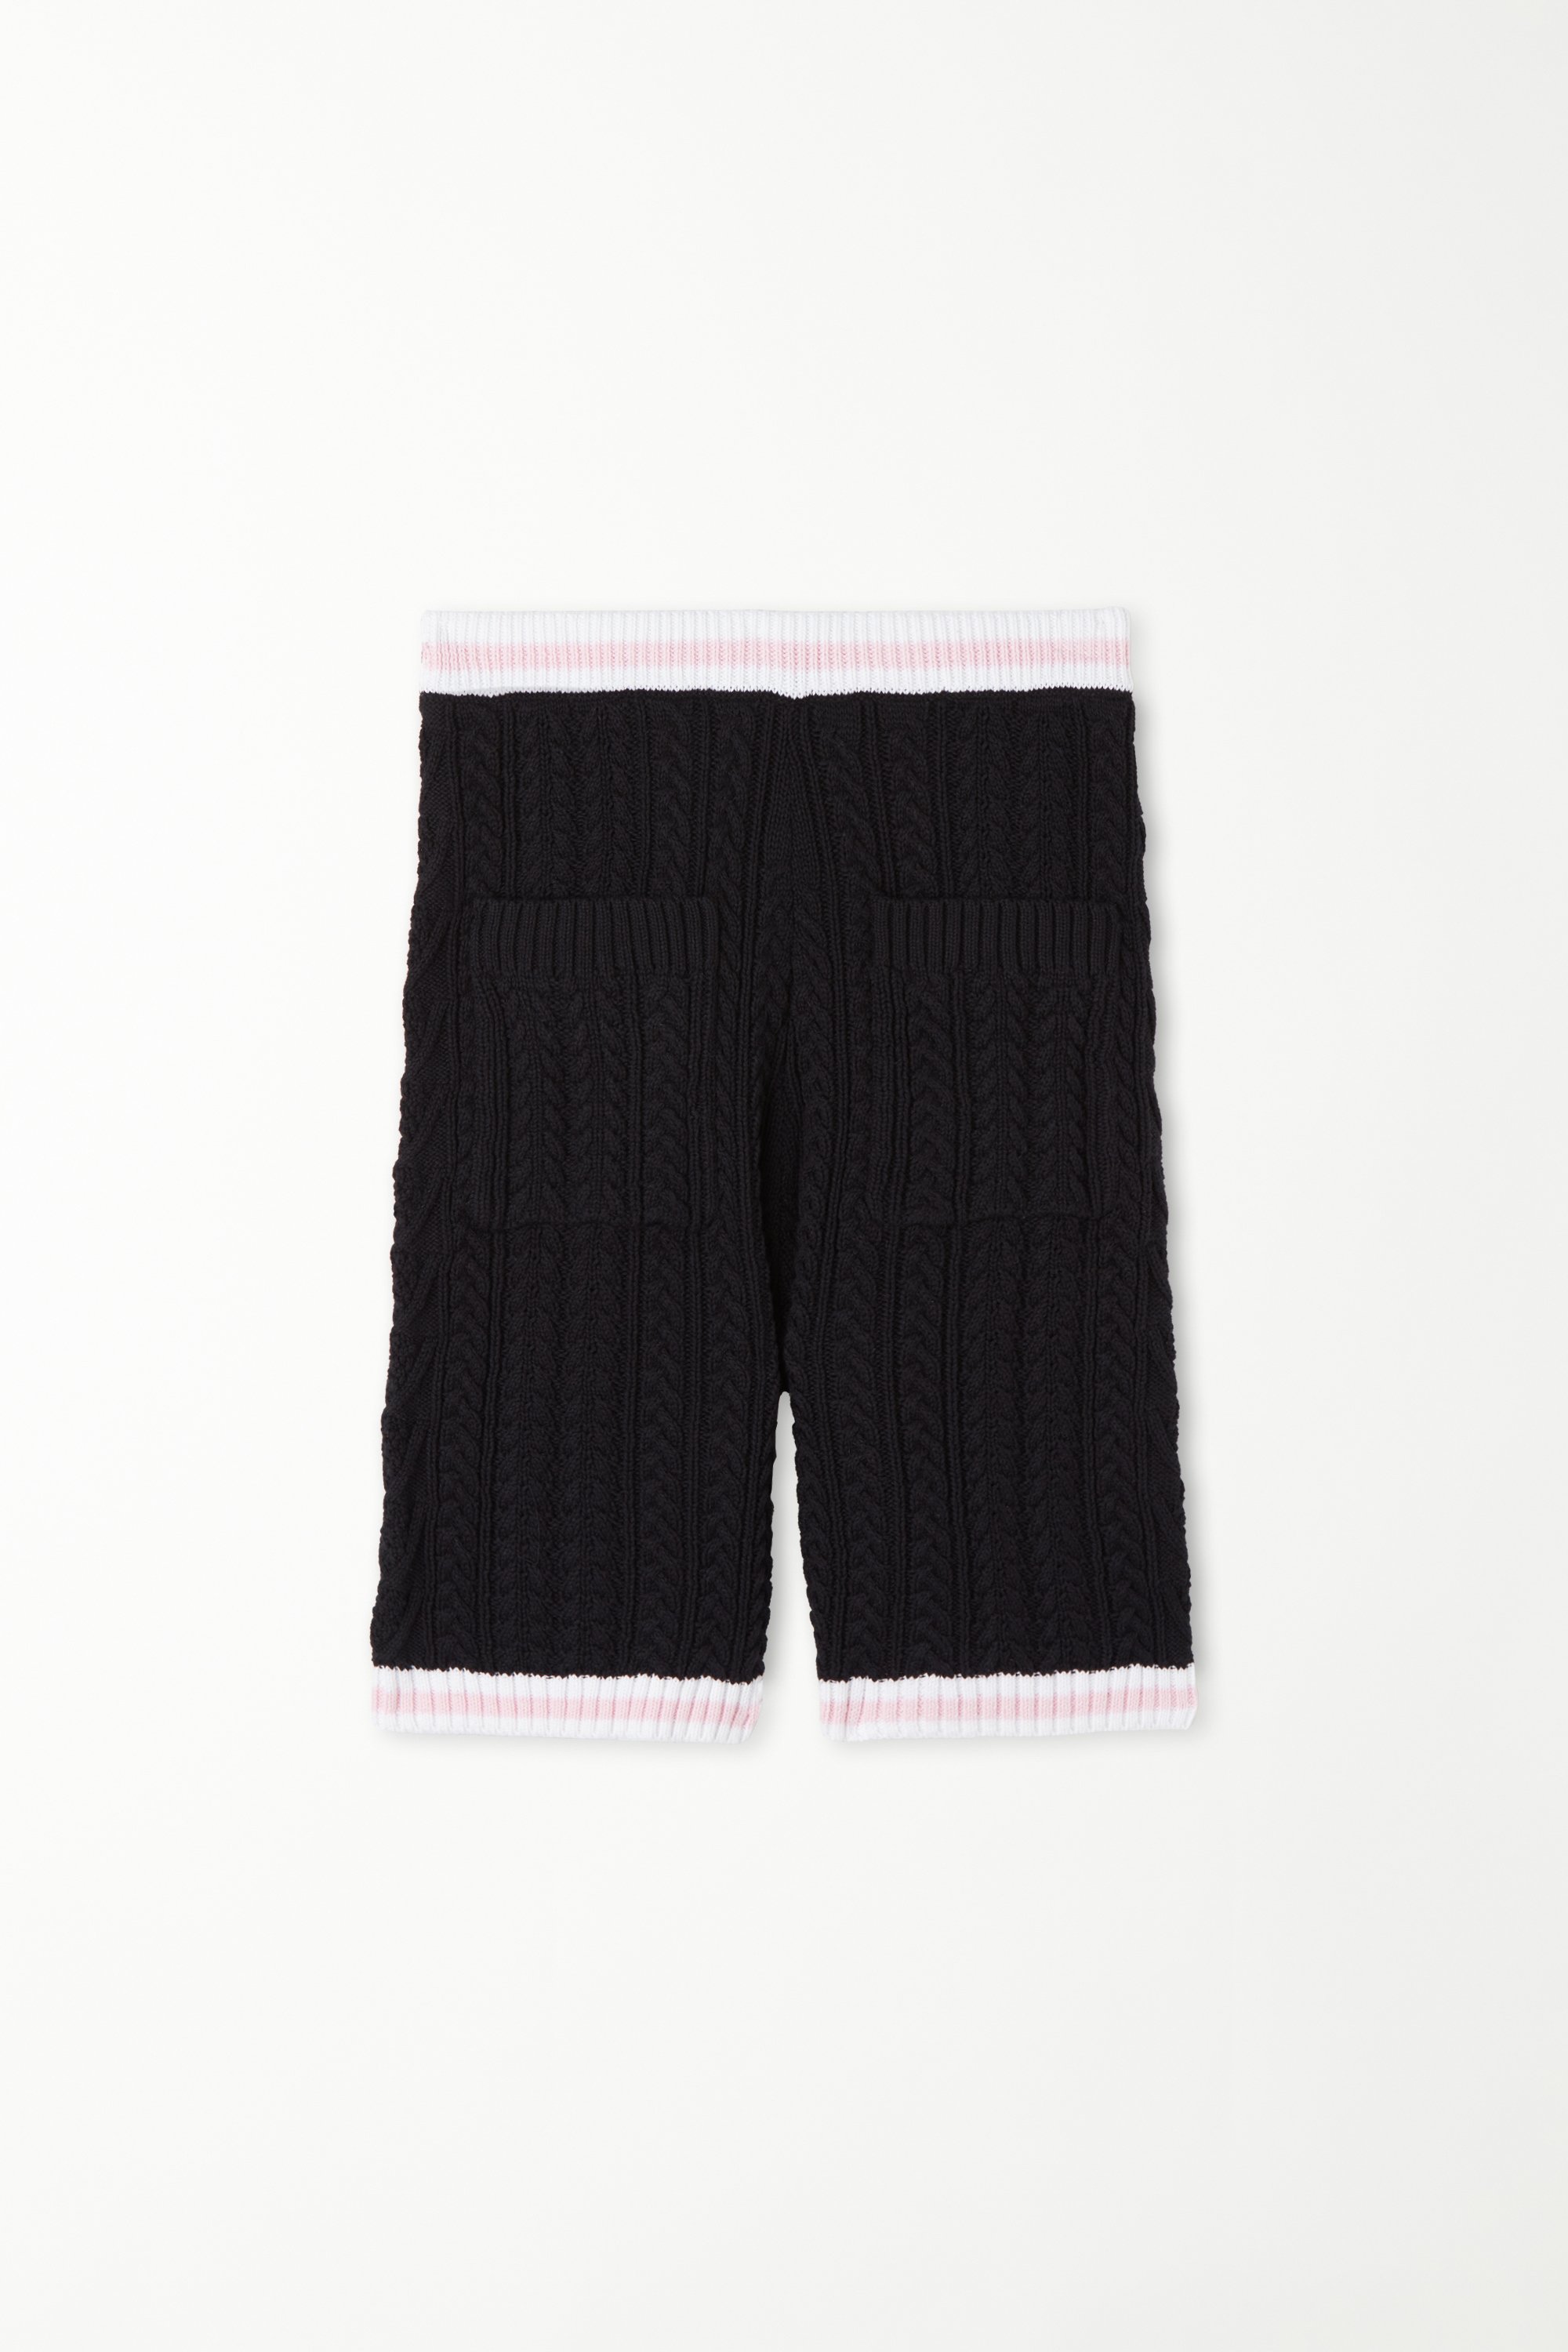 Full-Fashioned Open Knit Fabric Shorts with Pockets